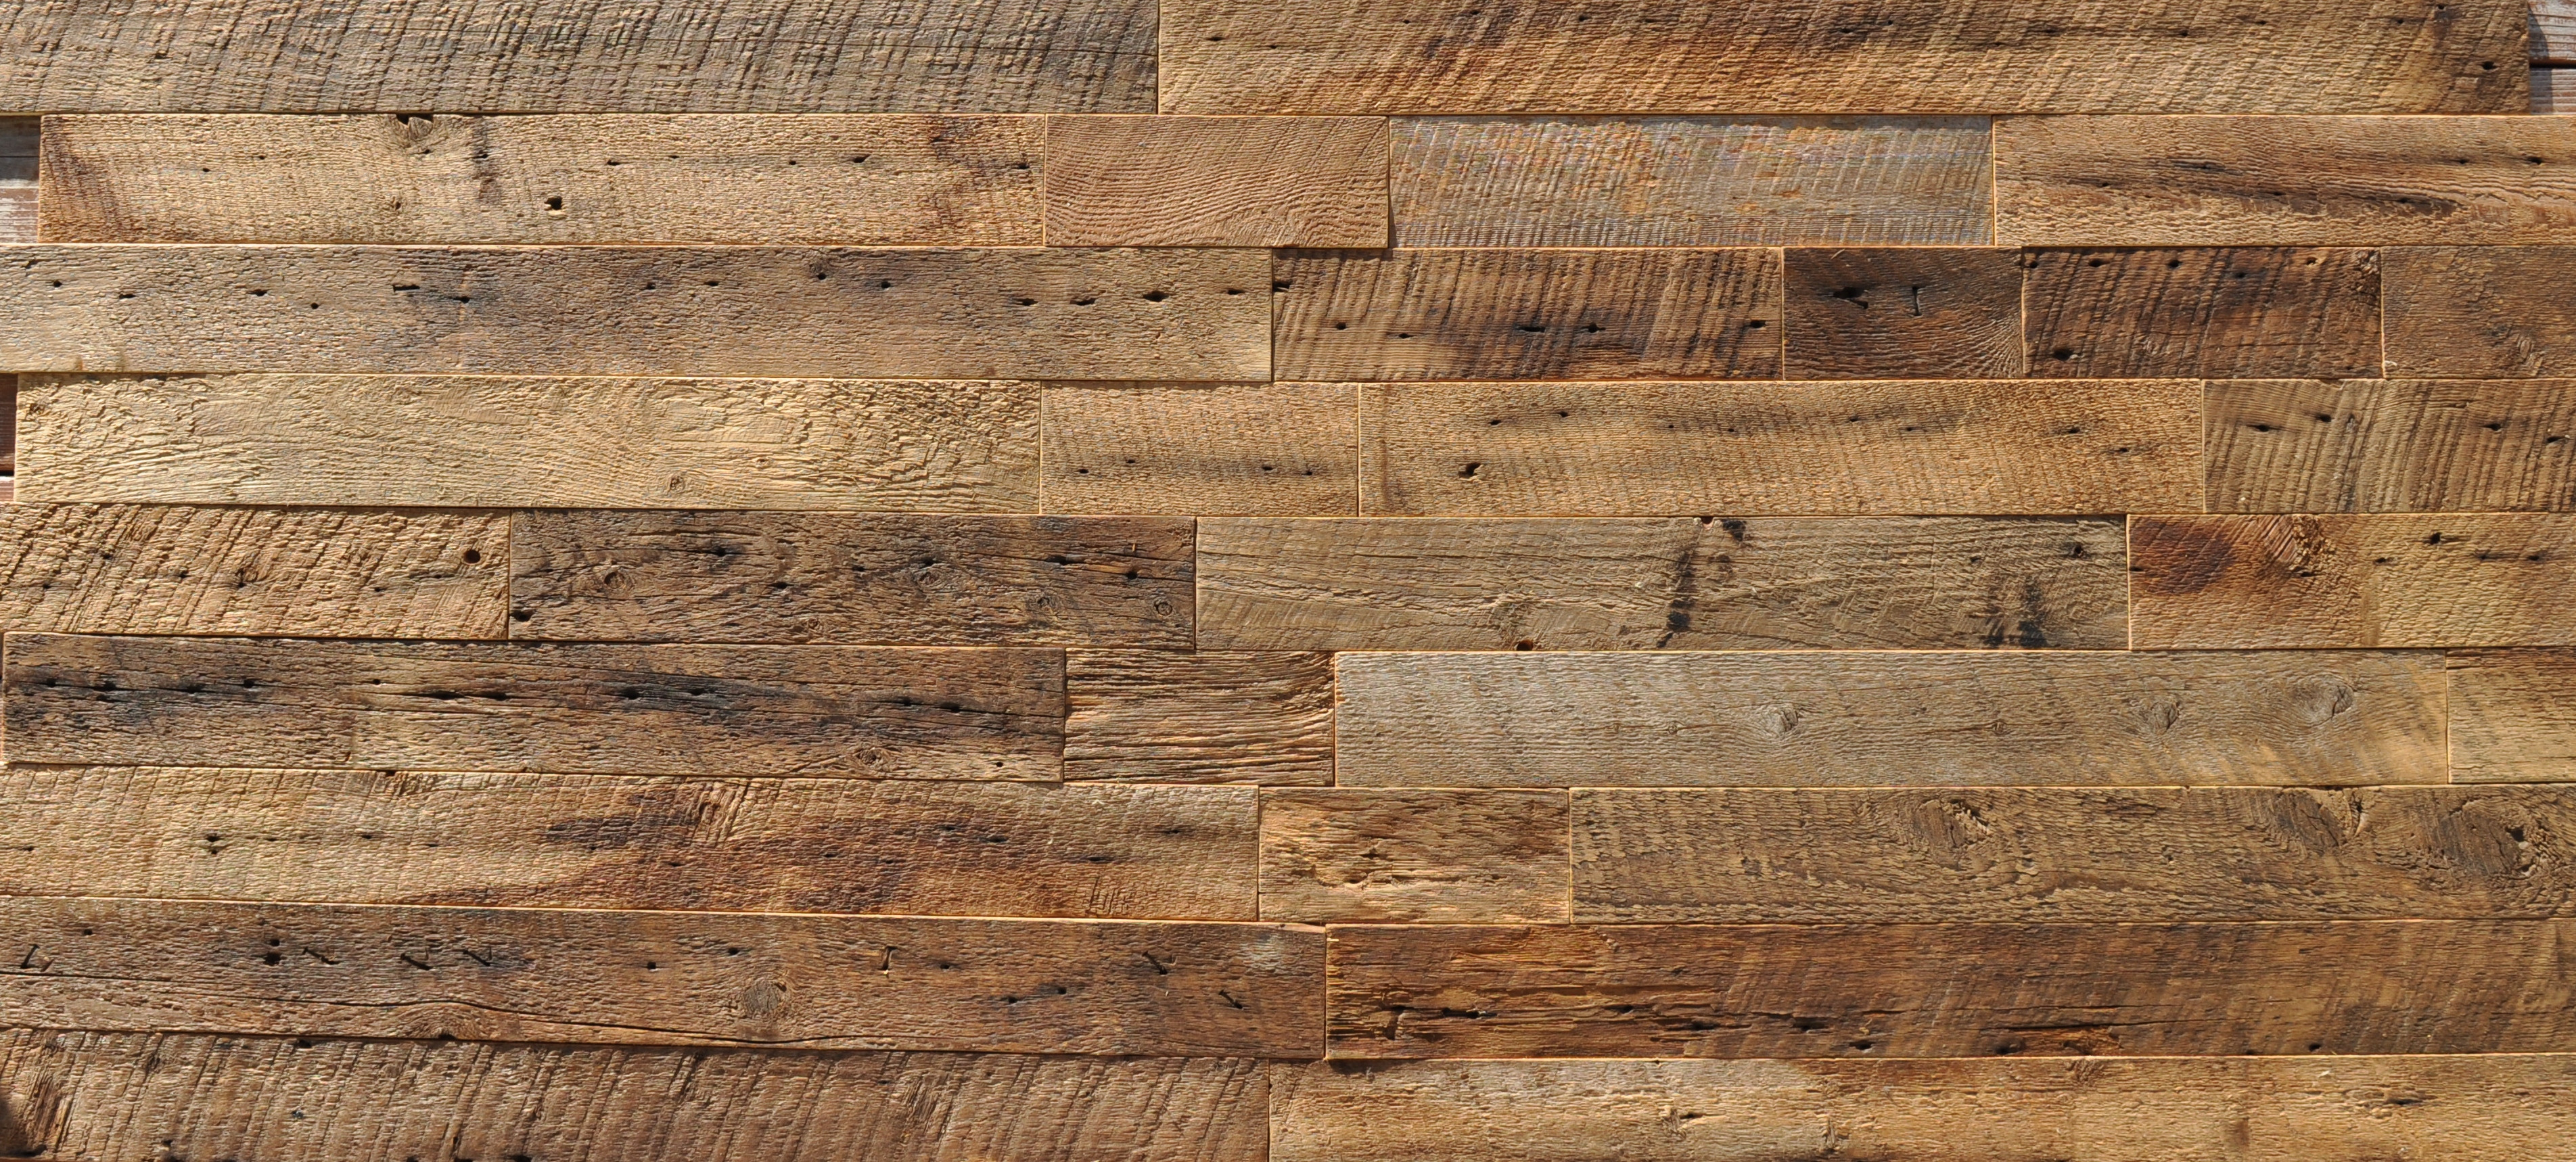 13 attractive Hardwood Flooring Per Square Foot 2024 free download hardwood flooring per square foot of diy reclaimed wood accent wall brown natural 3 5 inch wide priced inside gordon